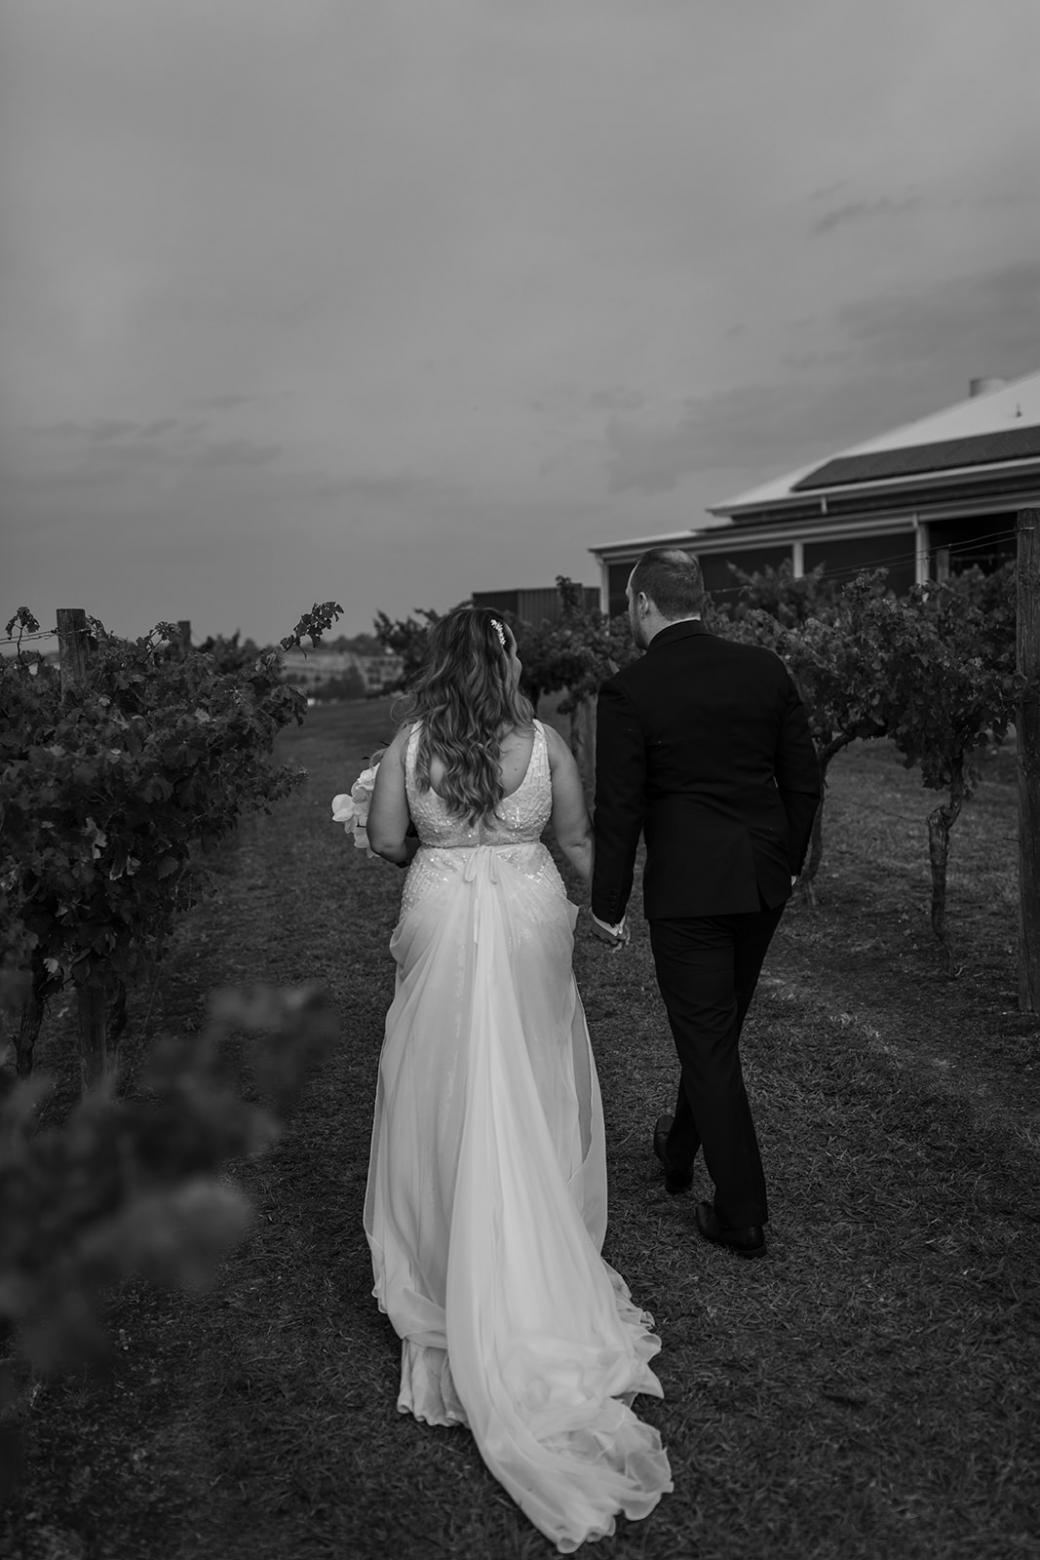 Real bride Liana wore the Luxe Fontanne wedding dress by Karen Willis Holmes.